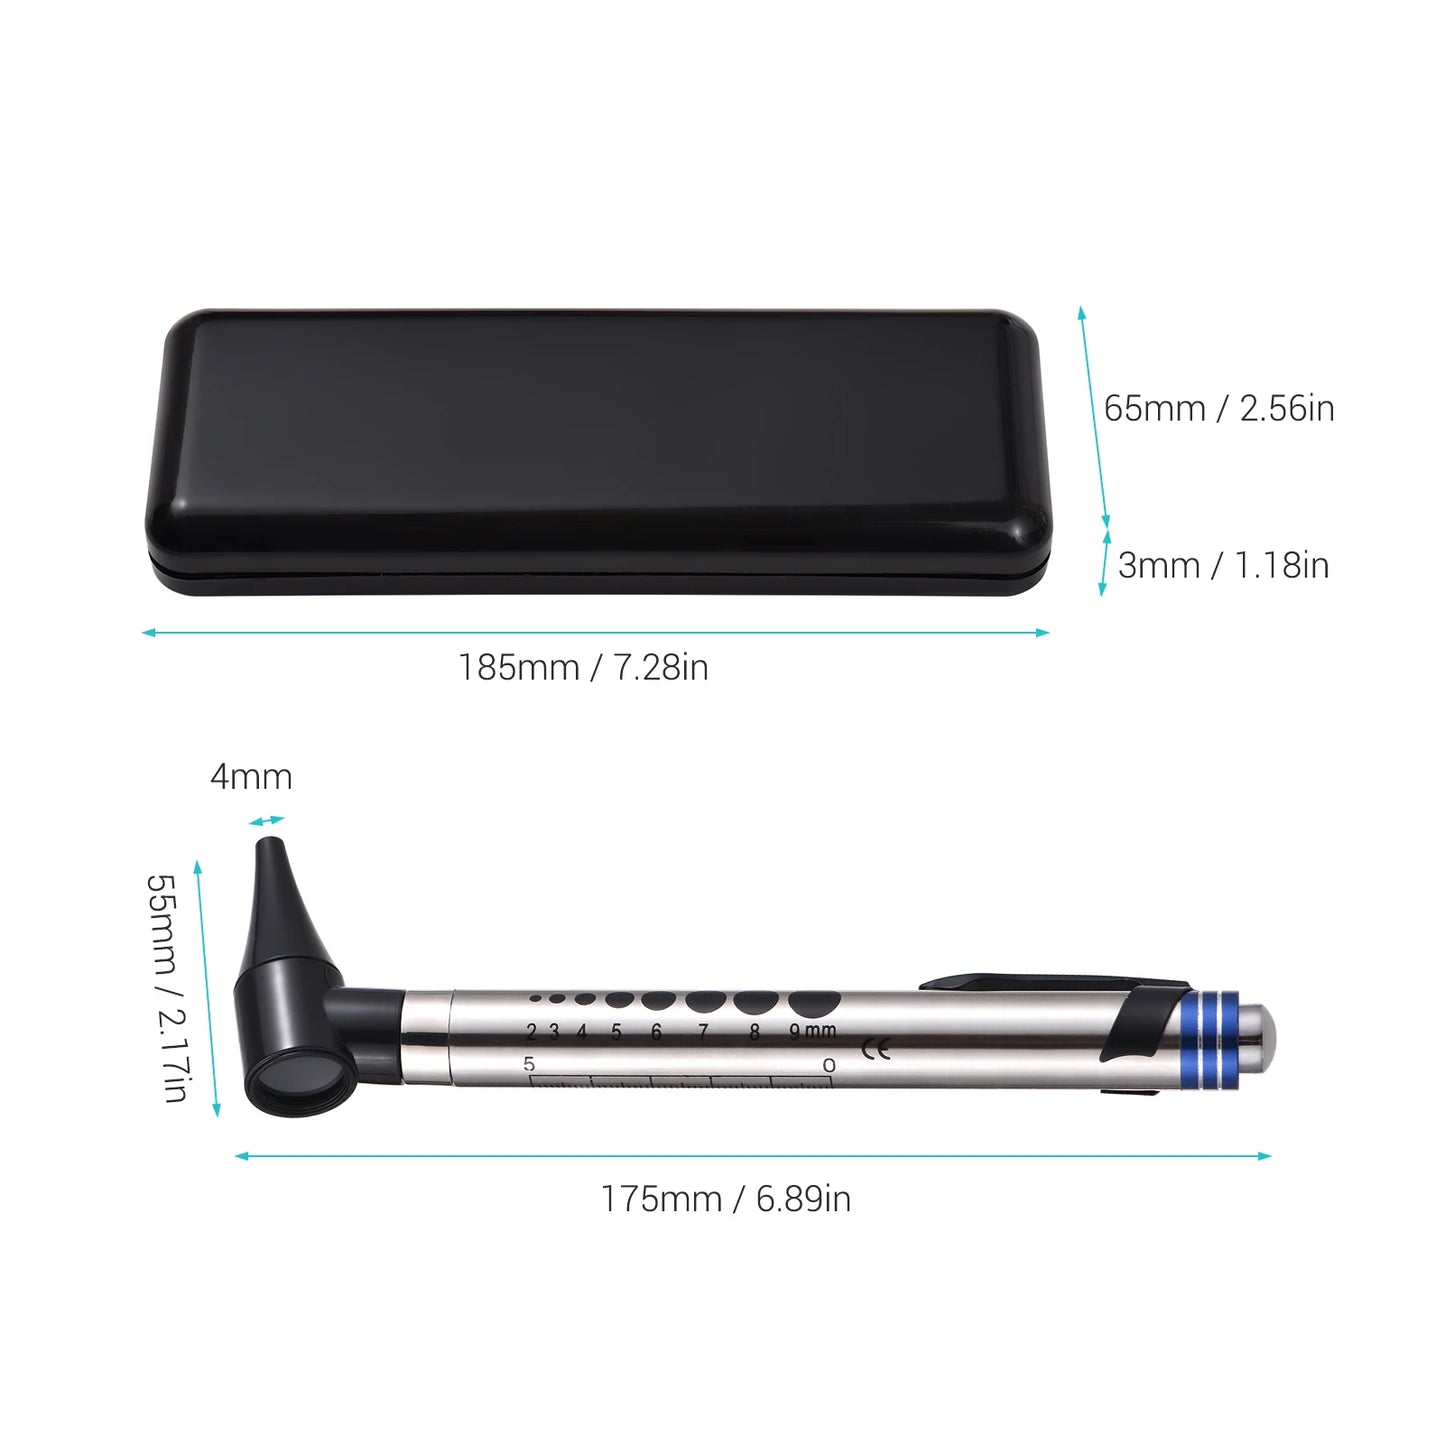 2 in 1 Otoscope and Eyes Diagnostic Tool Kit